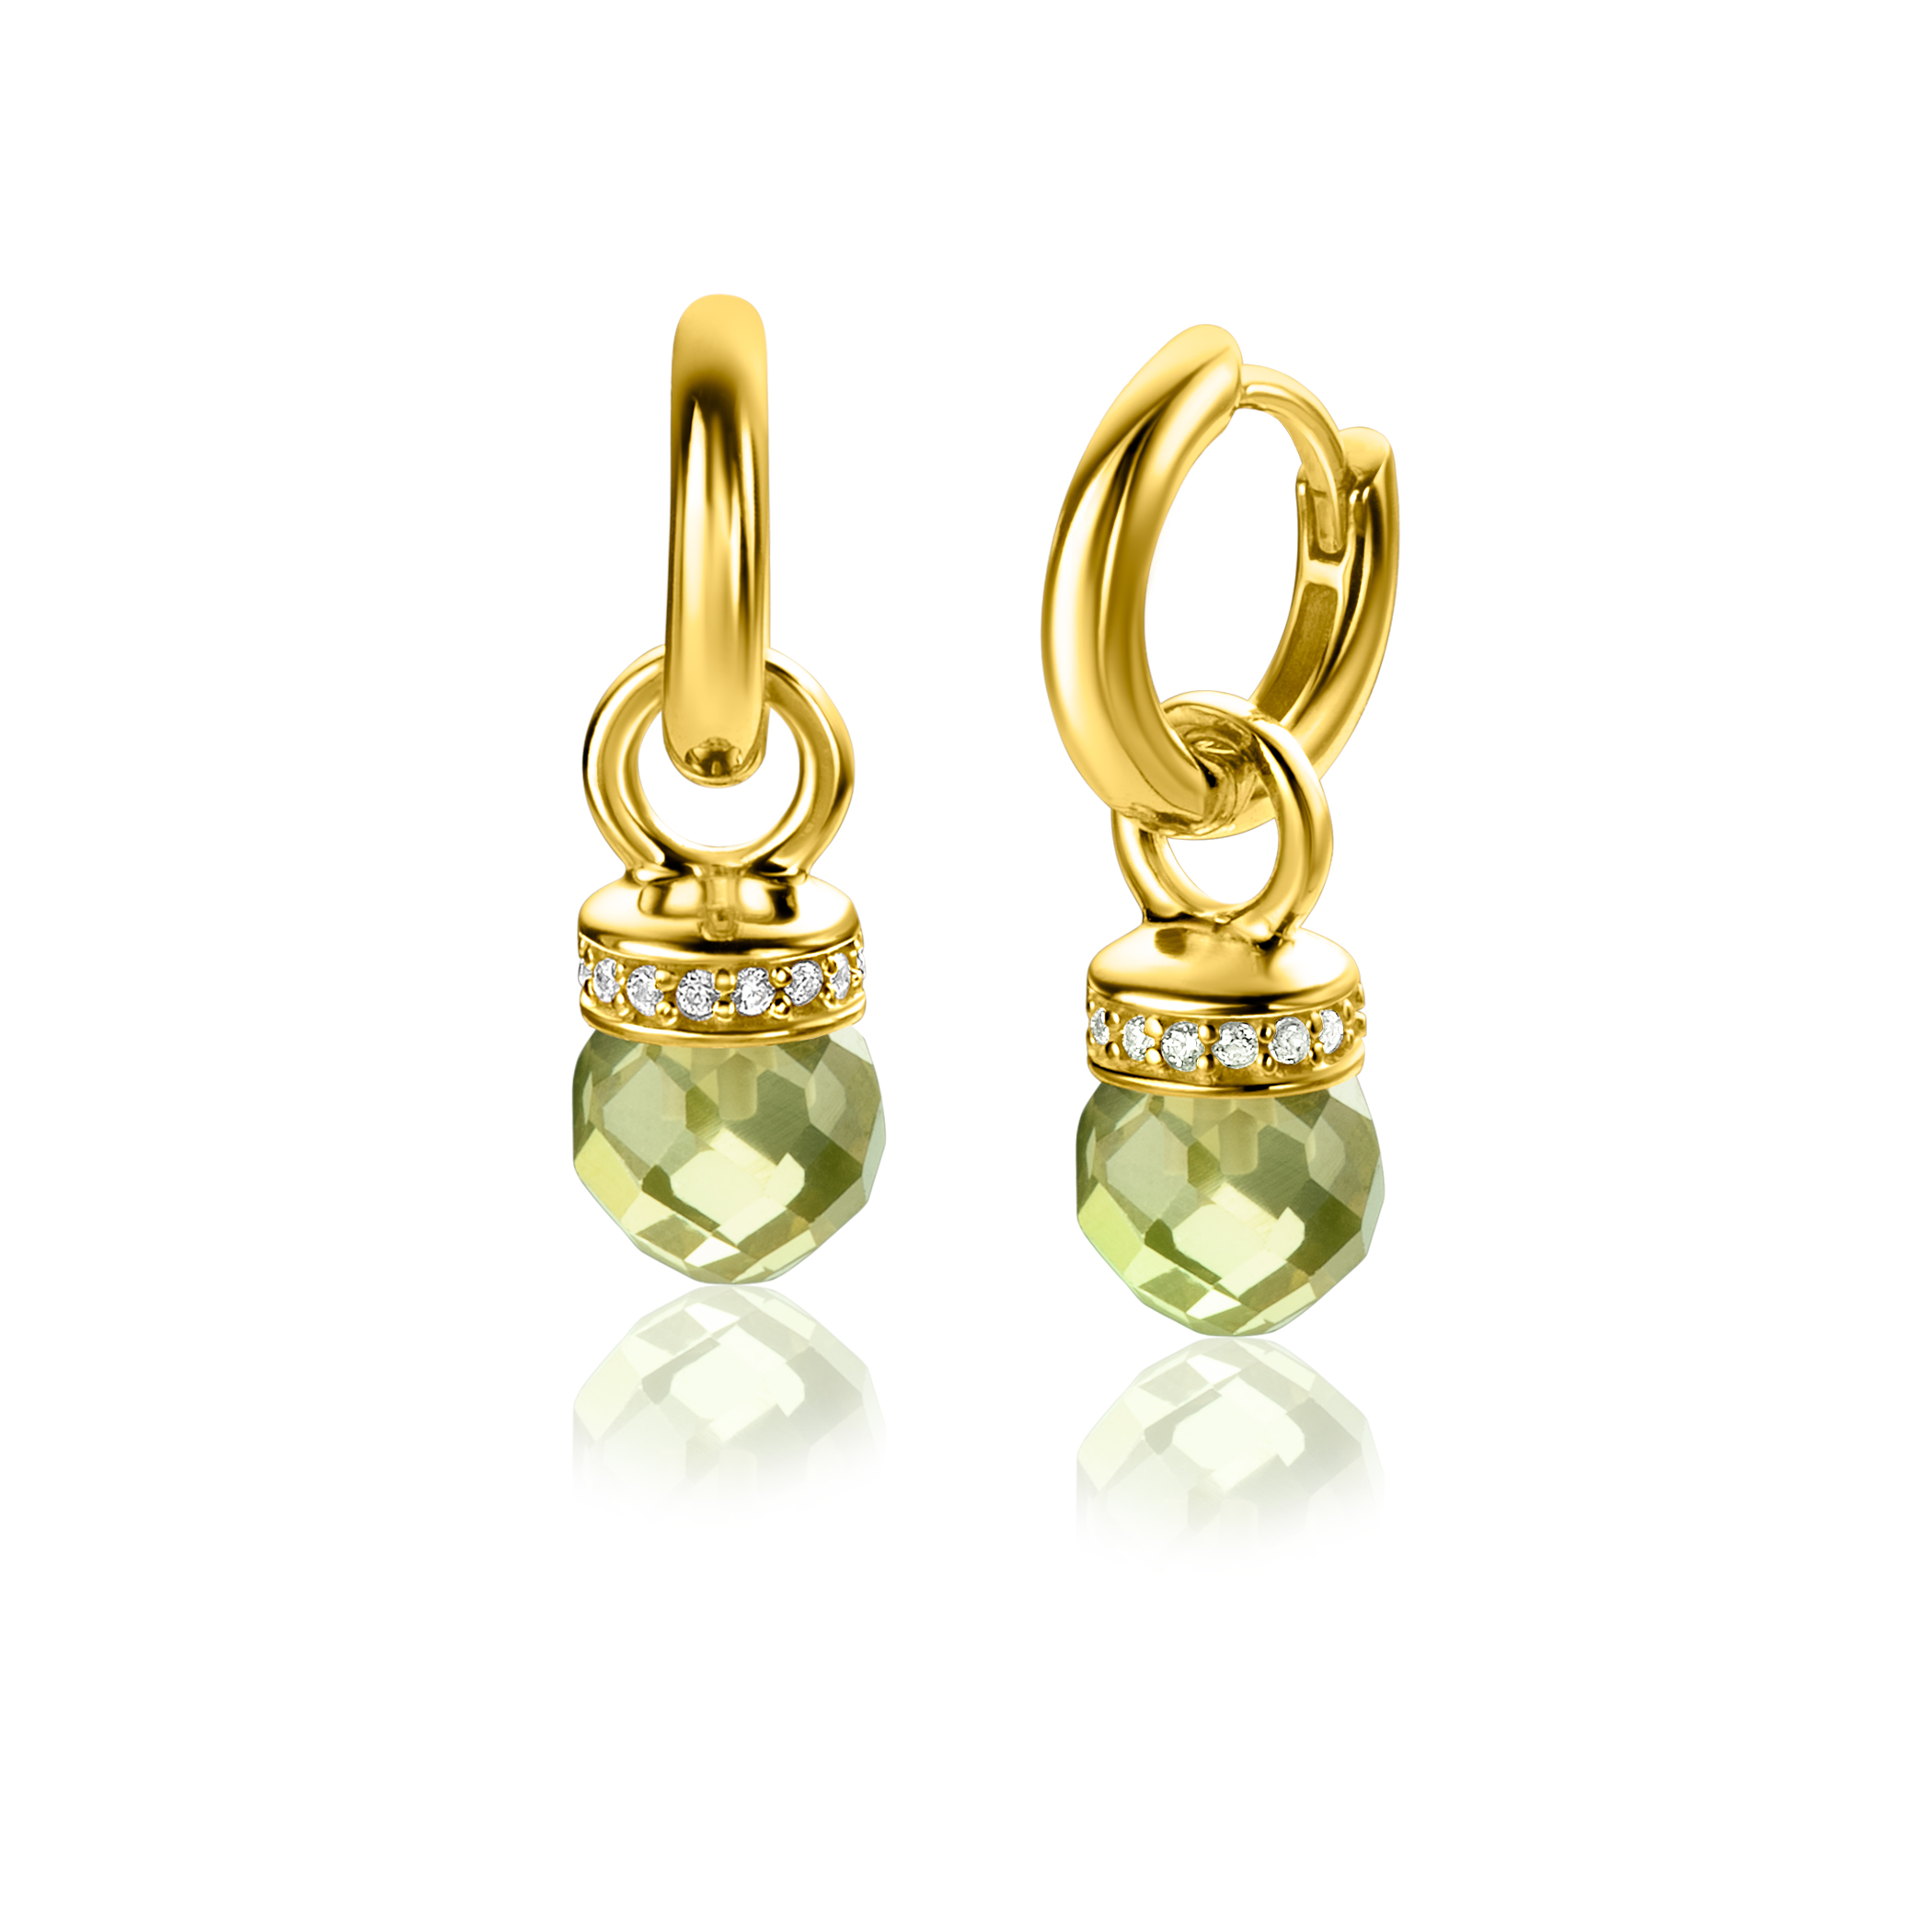 15mm ZINZI Gold Plated Sterling Silver Earrings Pendants with Round Green Peridot Color Stones and White Zirconias ZICH2428 (excl. hoop earrings)